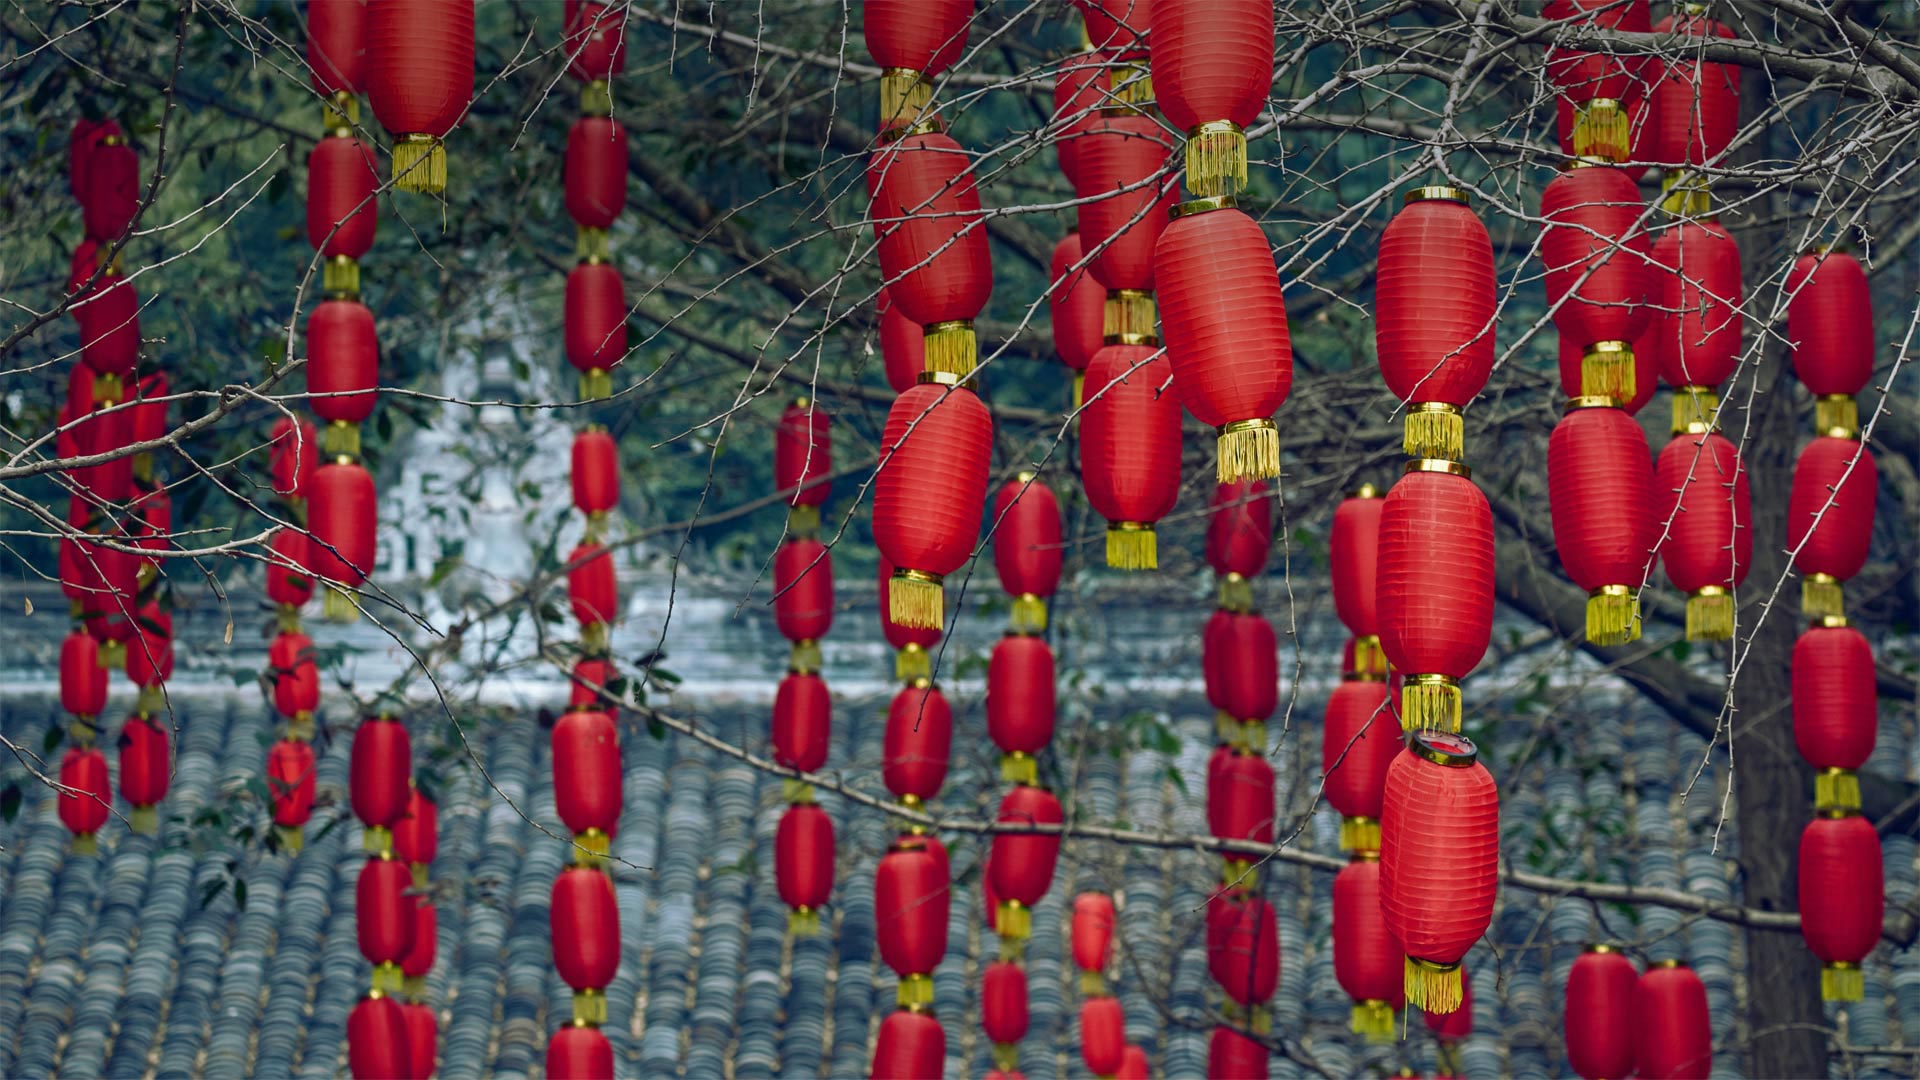 Red lanterns hanging on trees during the Lantern Festival in Chengdu, Sichuan, China - Philippe Lejeanvre/Getty Images)